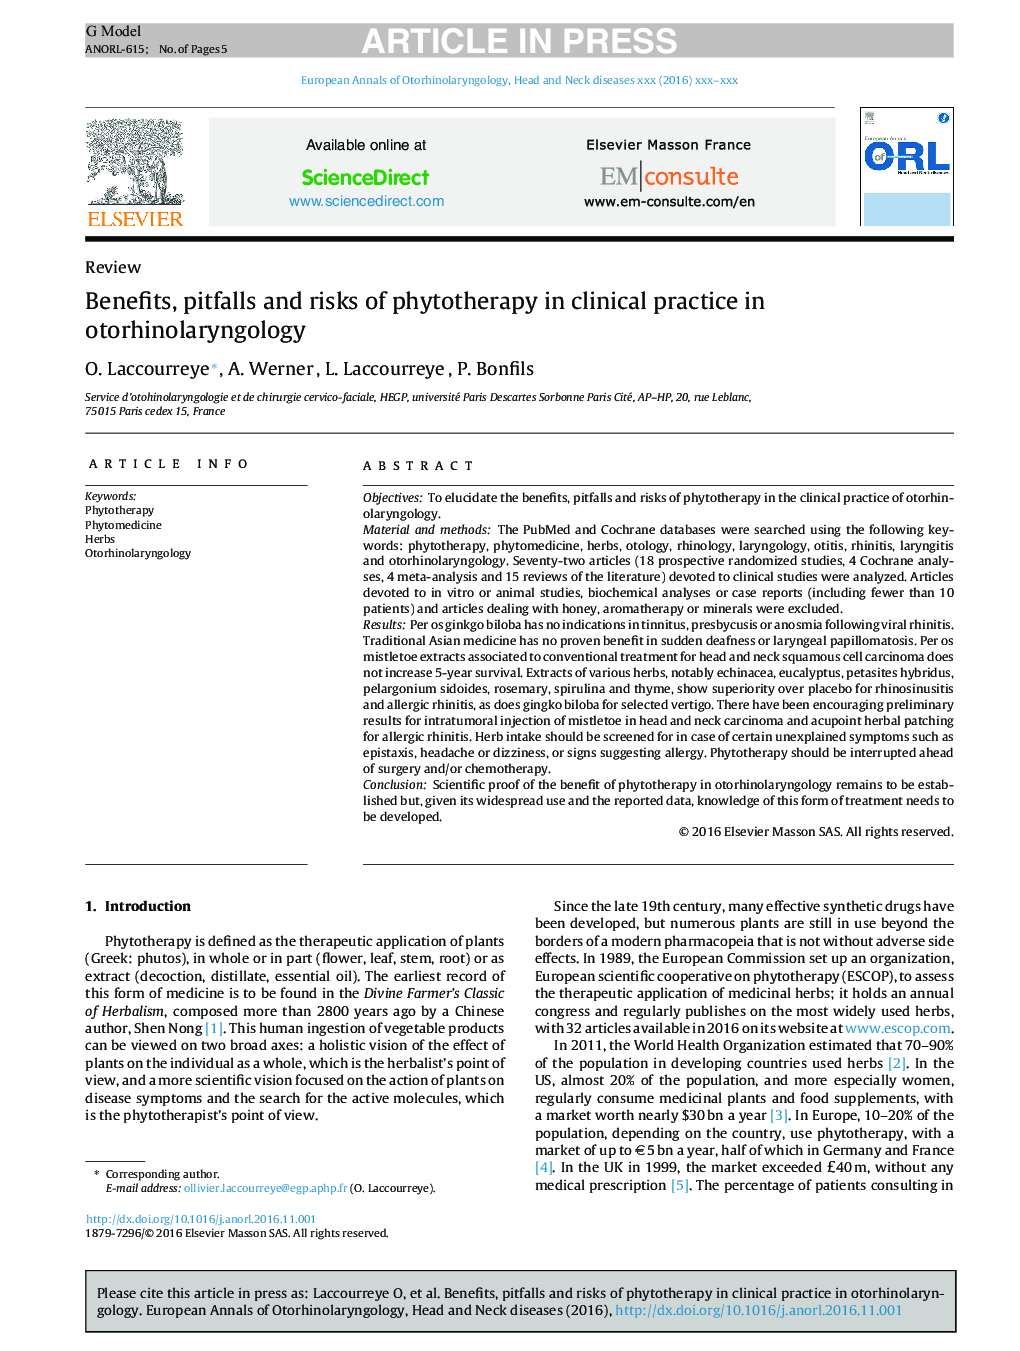 Benefits, pitfalls and risks of phytotherapy in clinical practice in otorhinolaryngology